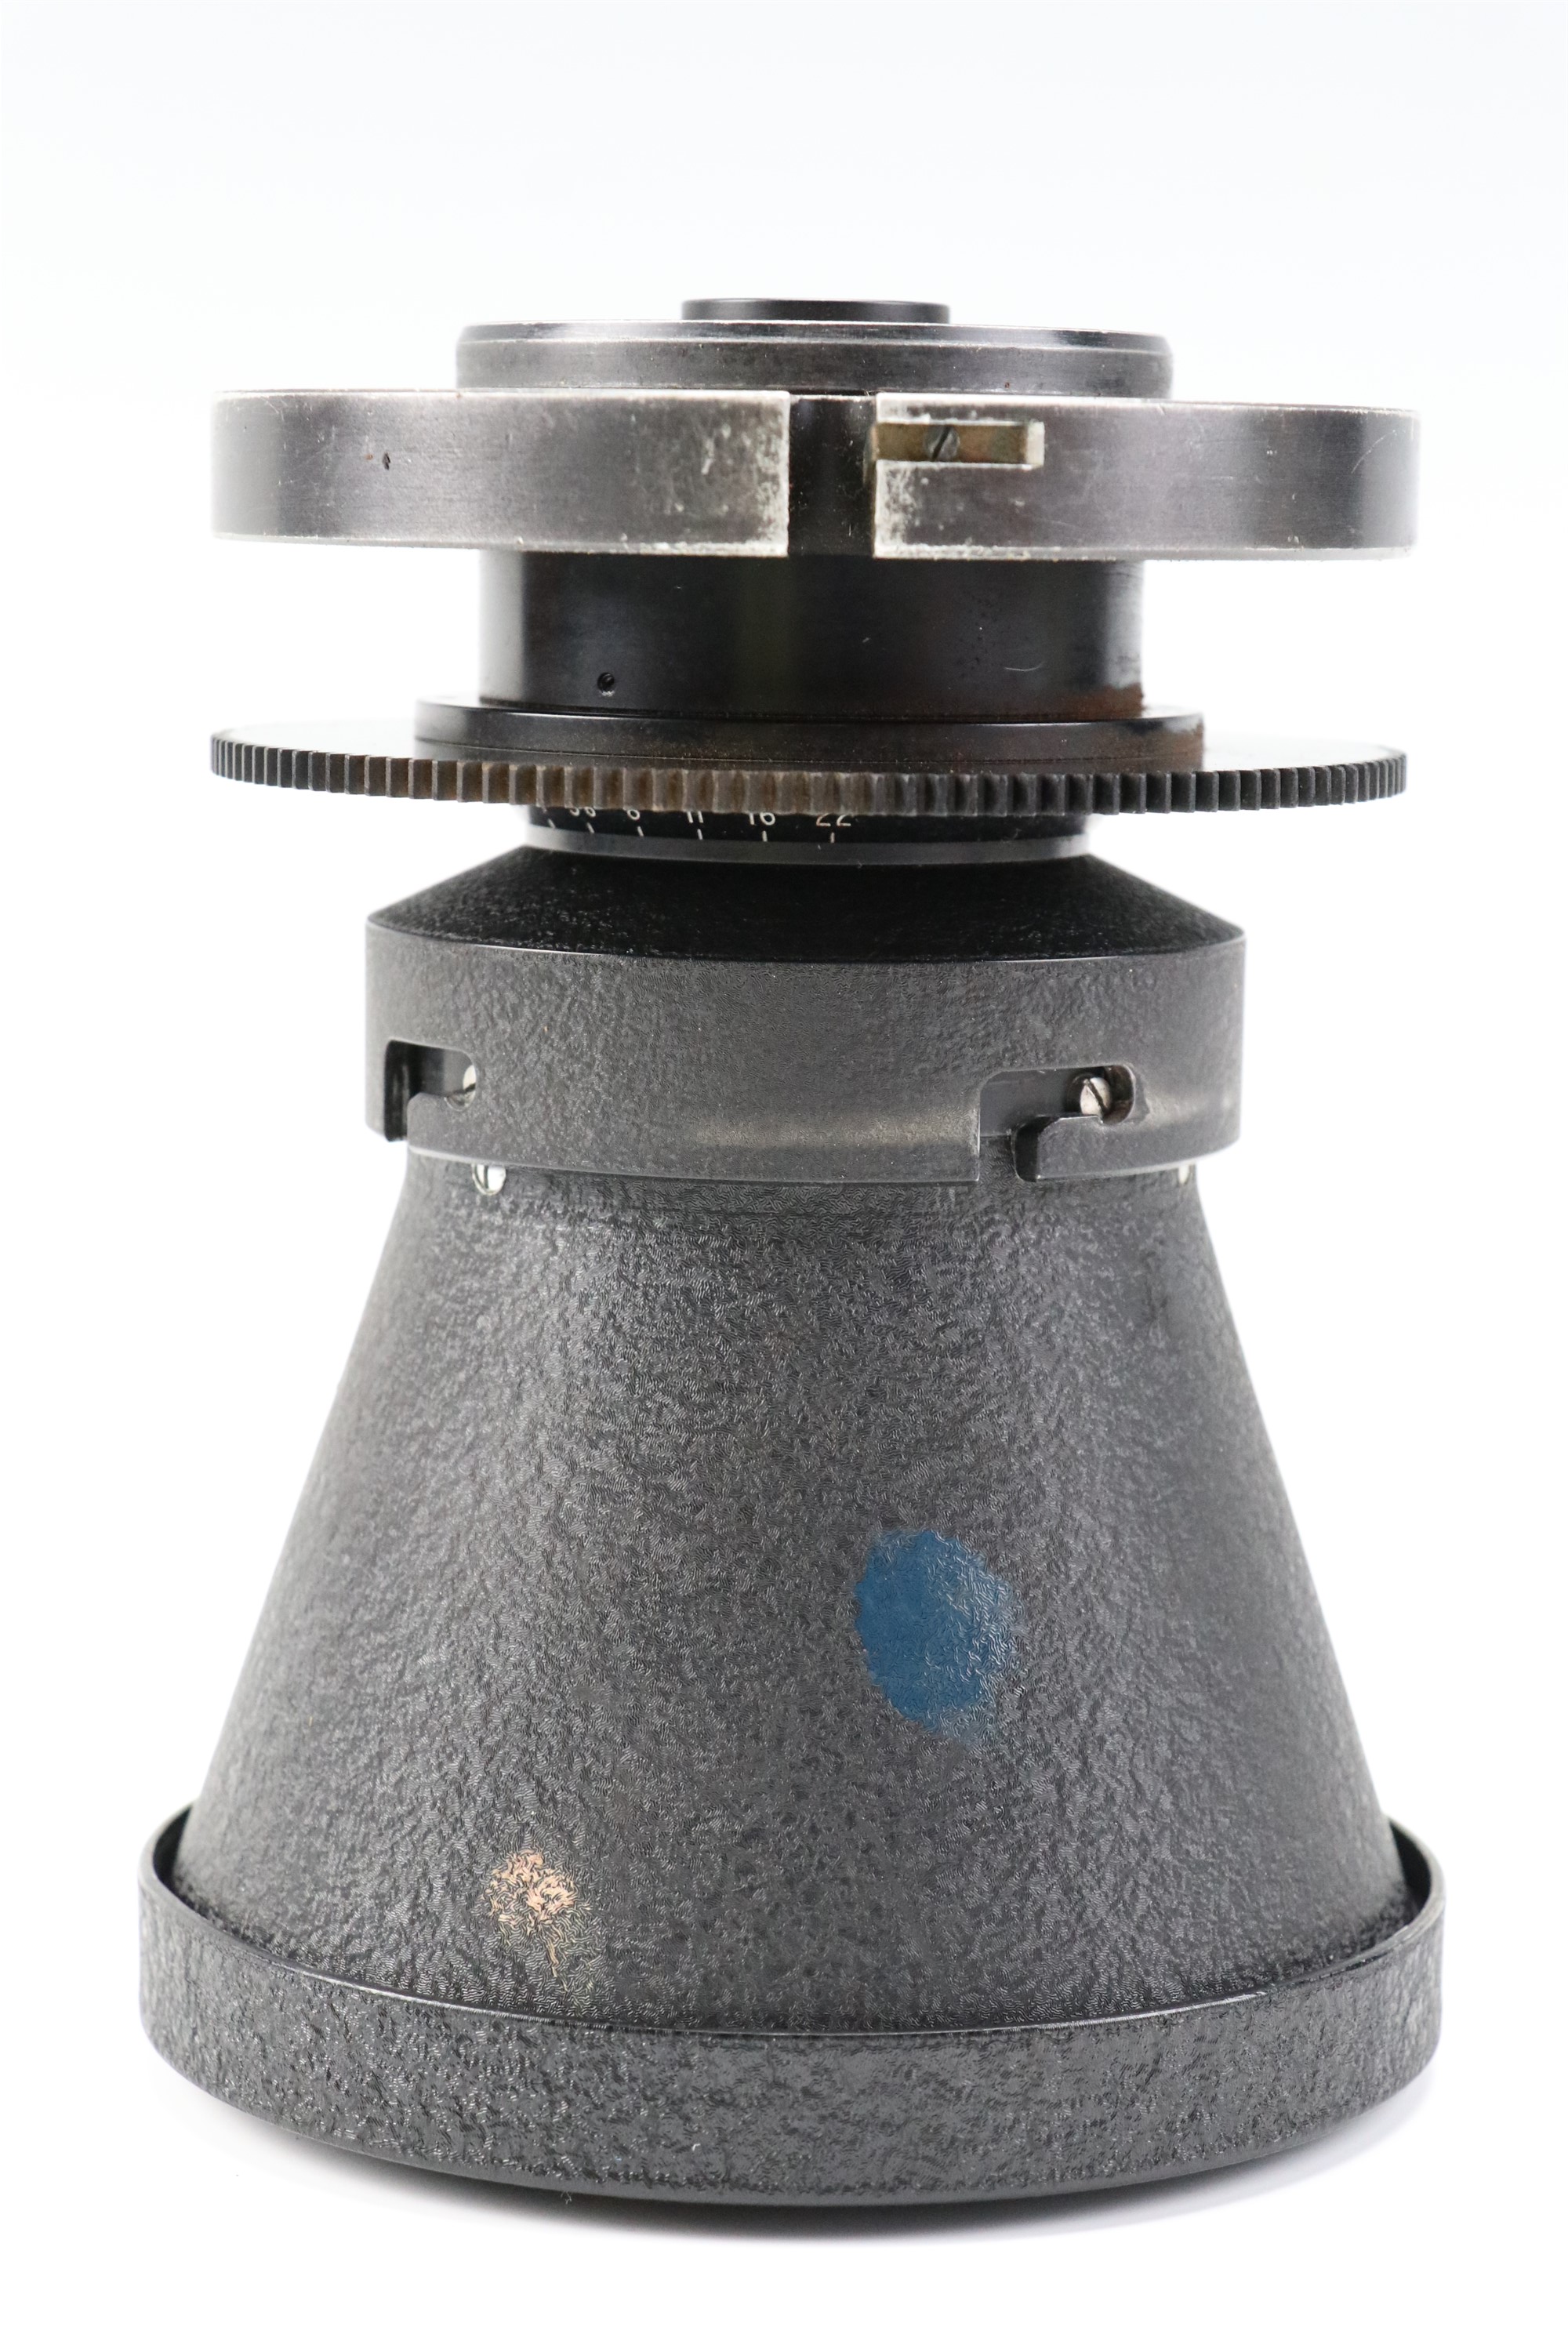 A cased set of Taylor and Hobson camera lenses, comprising an Ortal 2 inch 50 mm f/2 T2.3 TV Lens, - Image 12 of 39